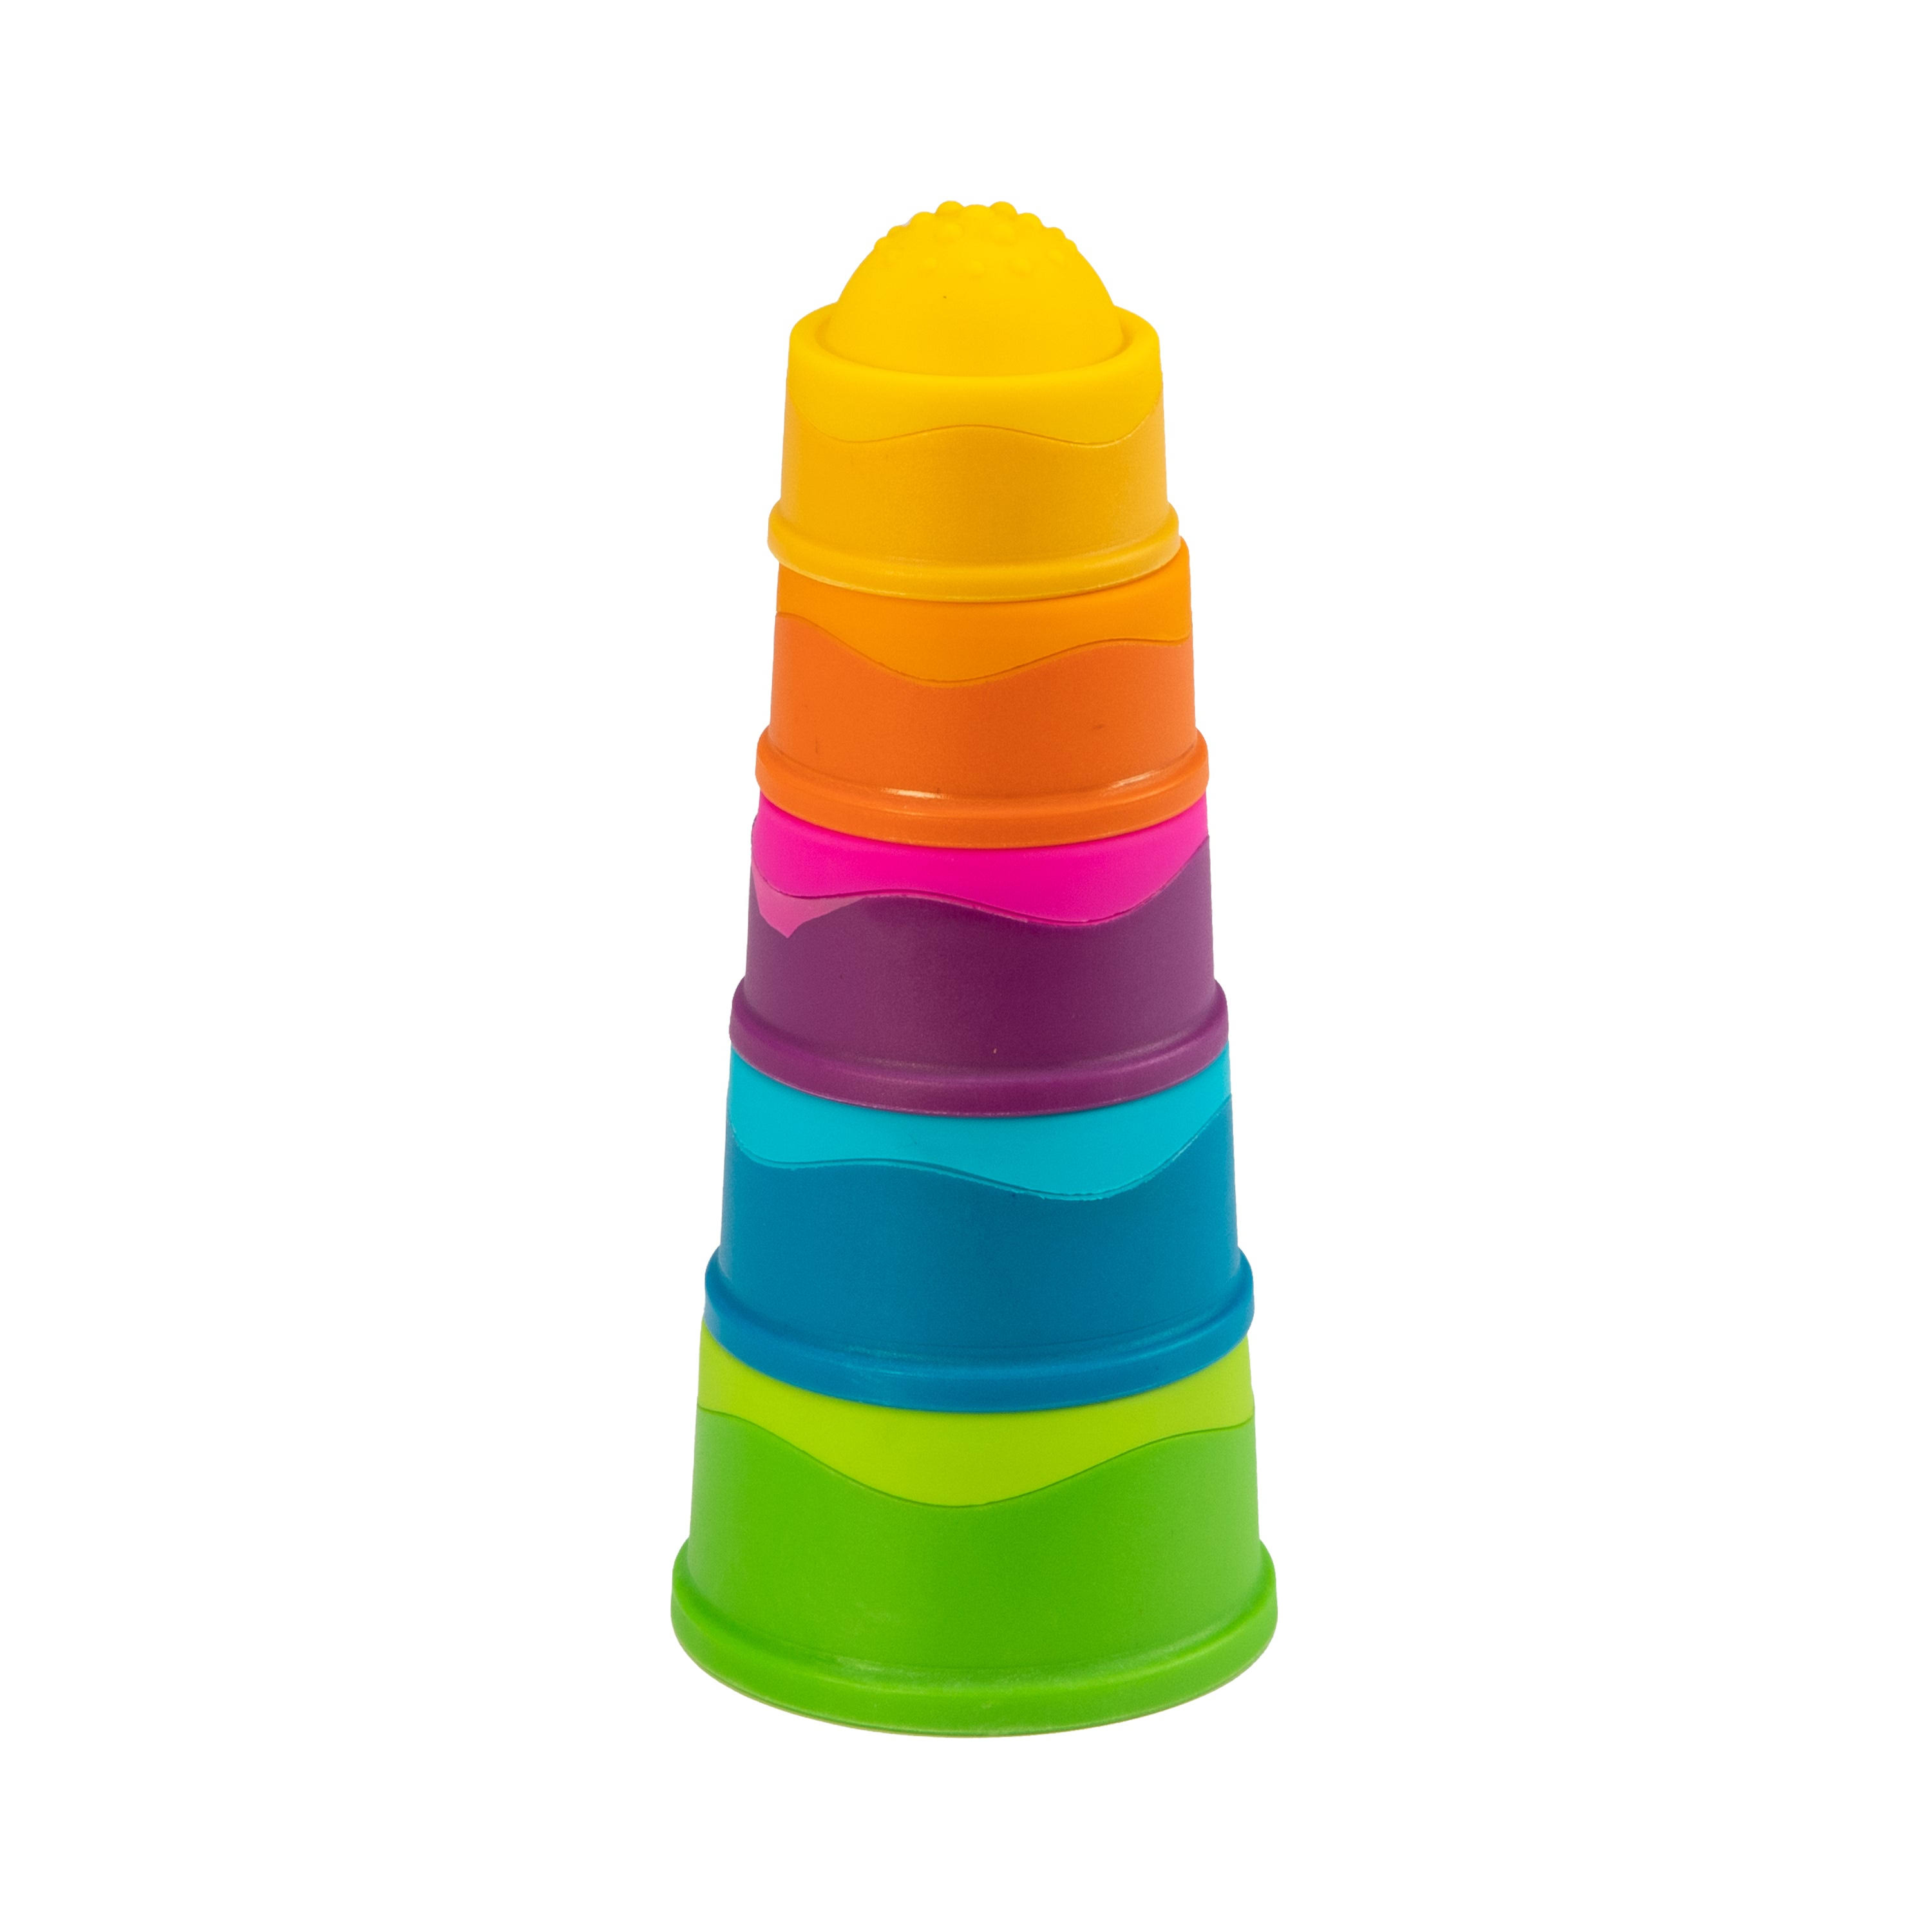 Dimpl Stack by Fat Brain Toys 26798